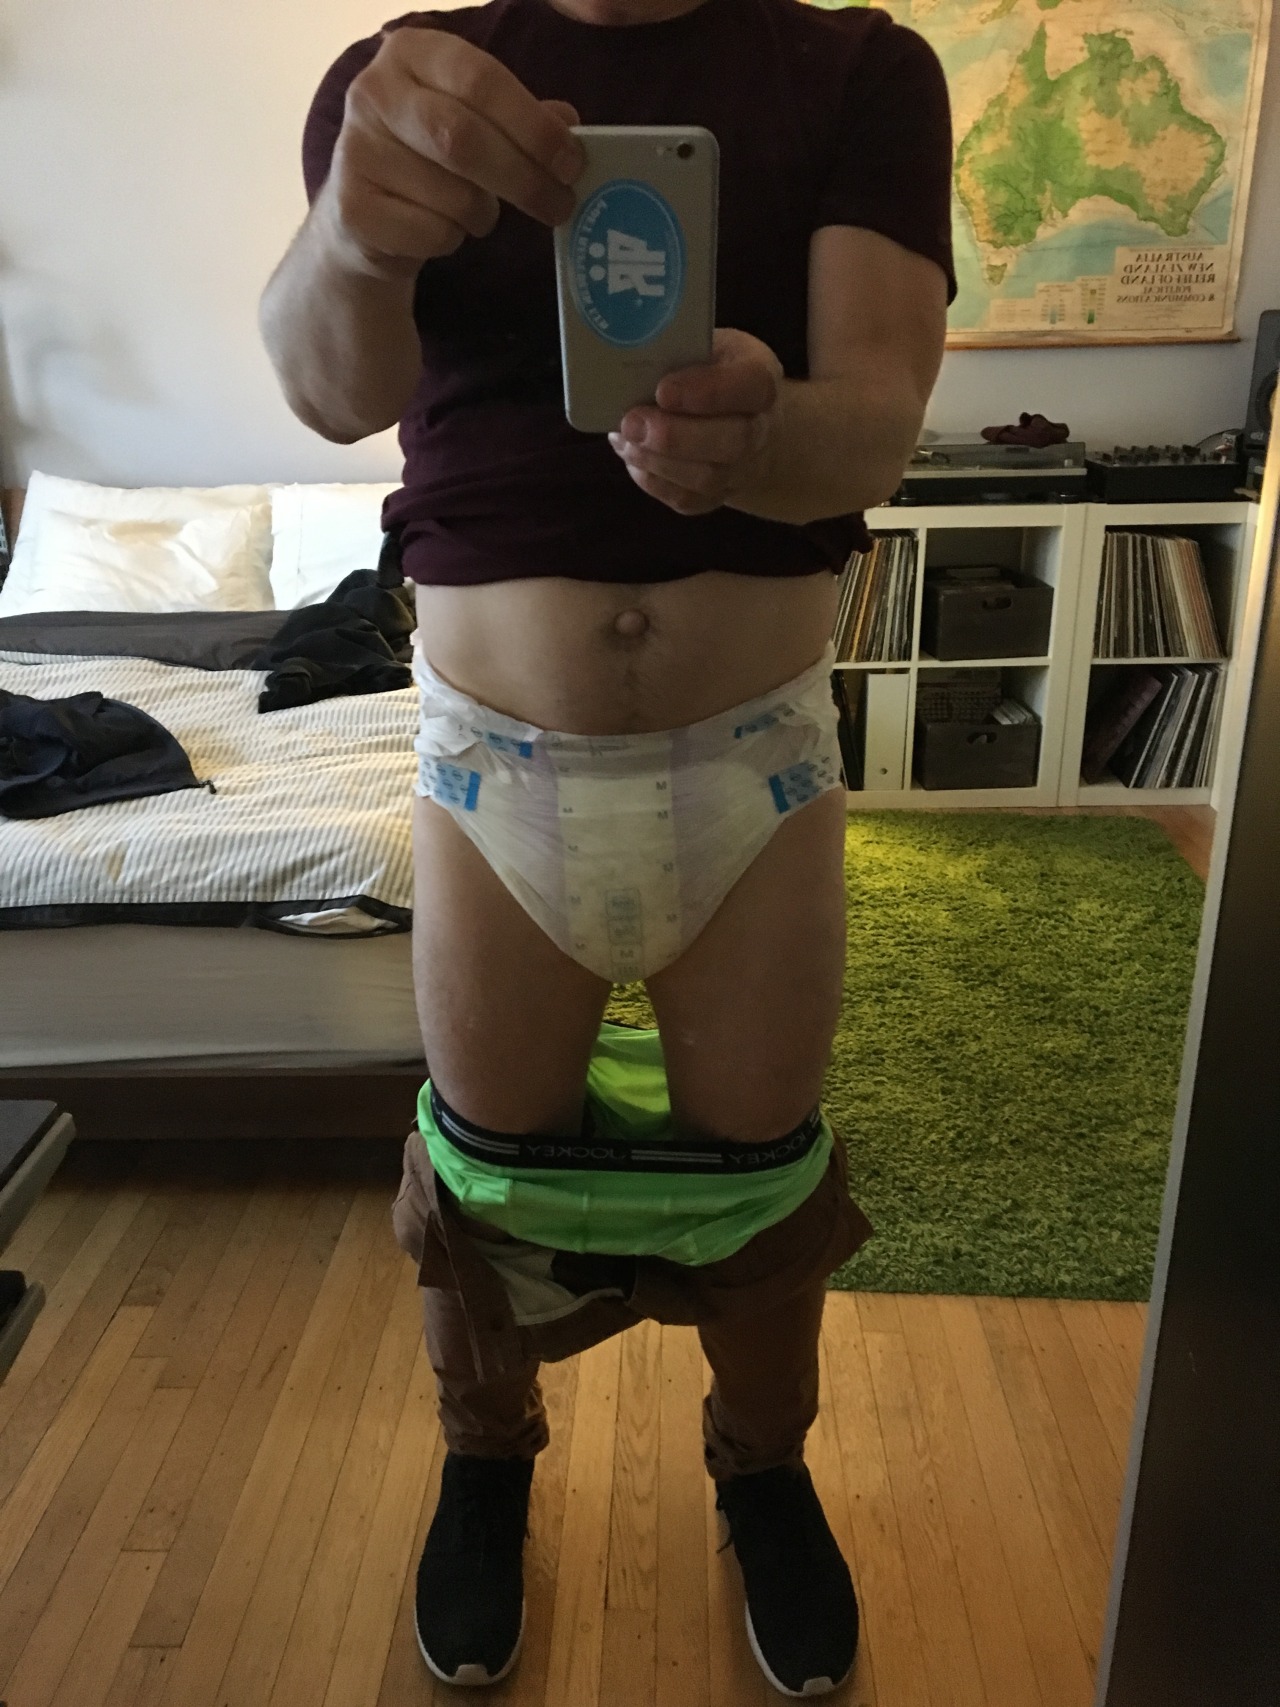 wetscruff:Tena active fit are such a perfect daily diaper. 6 hours no problem, no